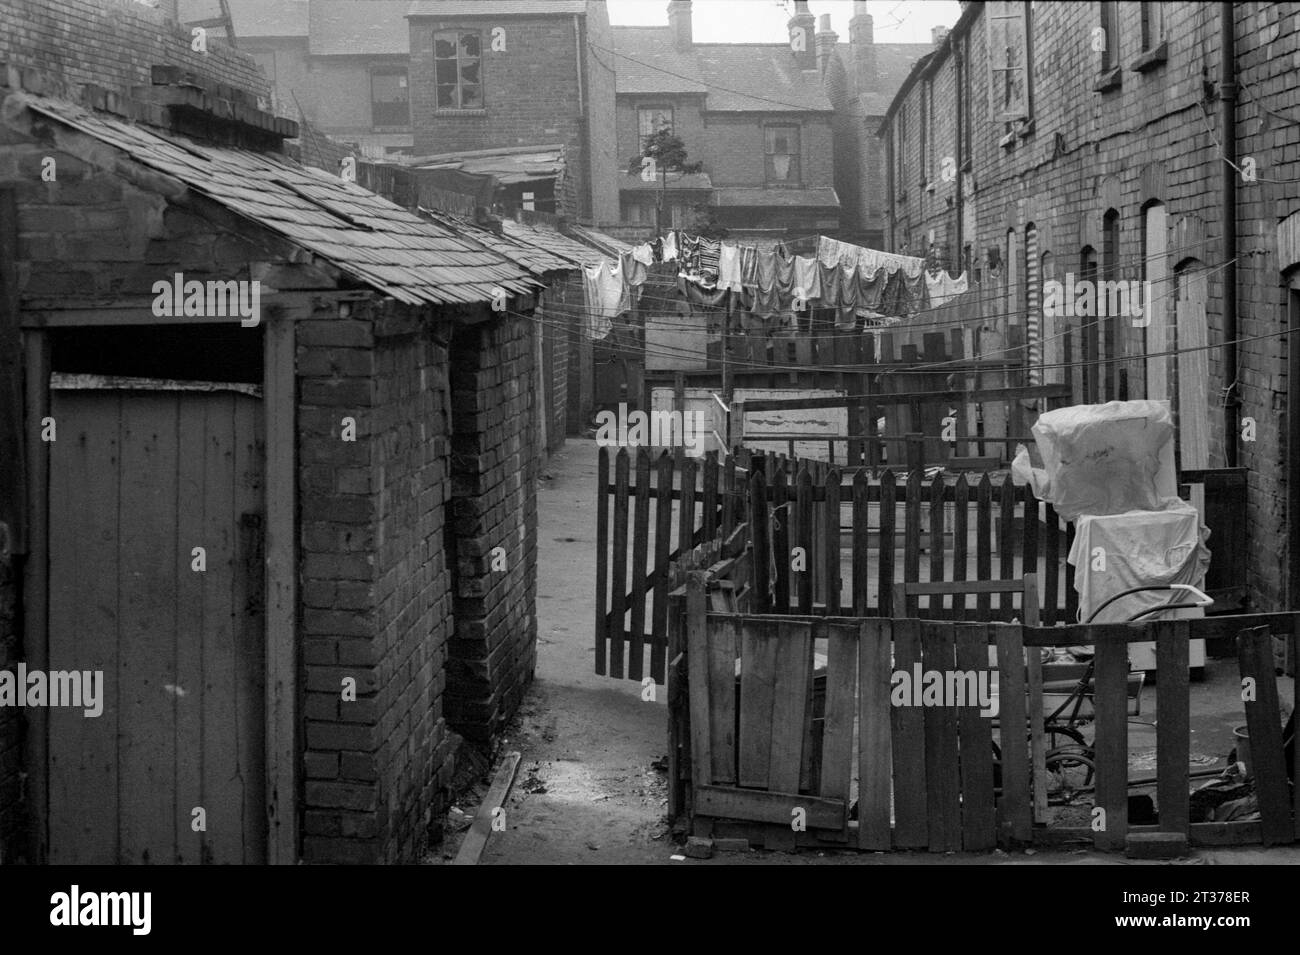 Backyards of houses on Nugent Street looking towards Calcutta Street during the slum clearance and demolition of St Ann's, Nottingham. 1969-1972 Stock Photo